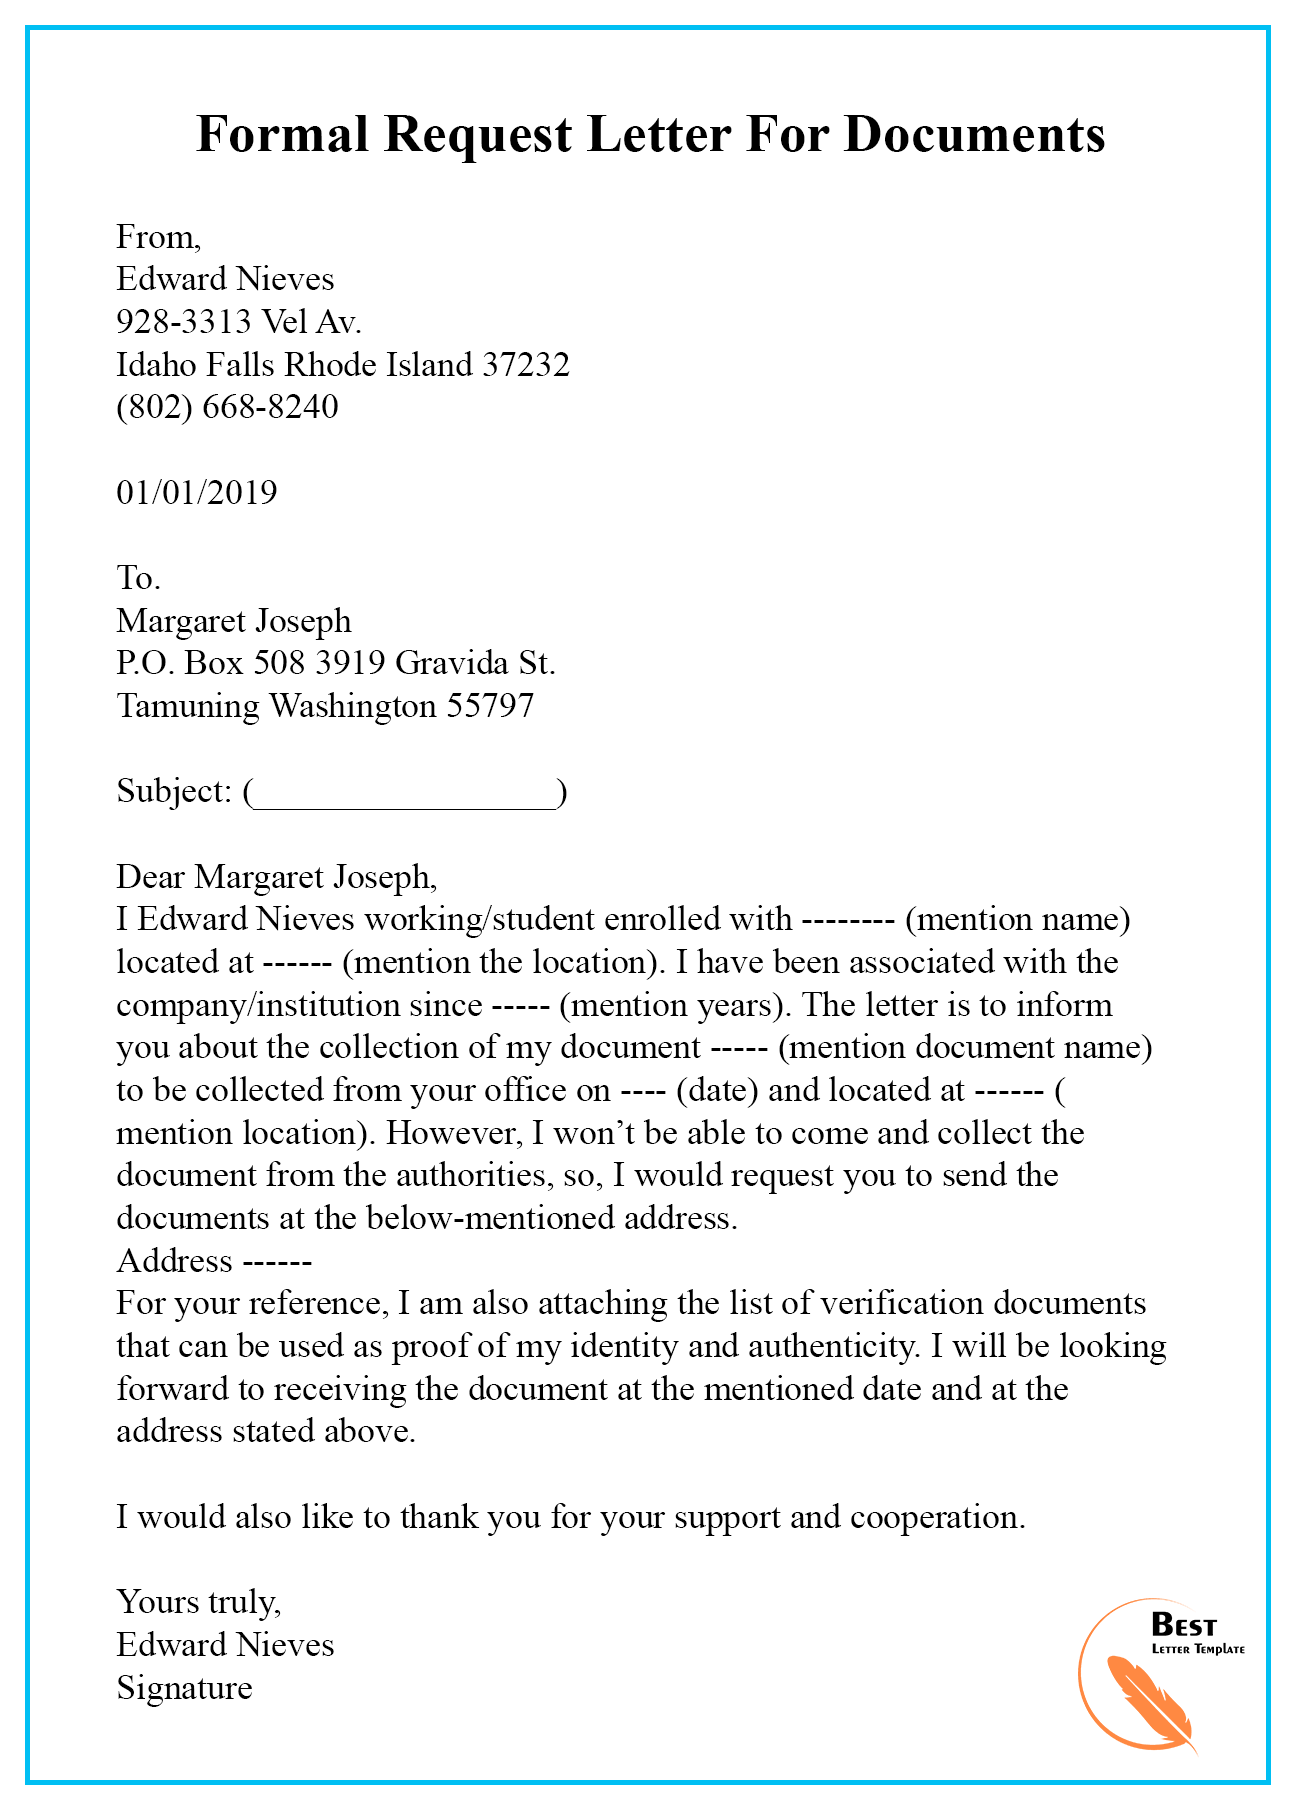 the letter of request example